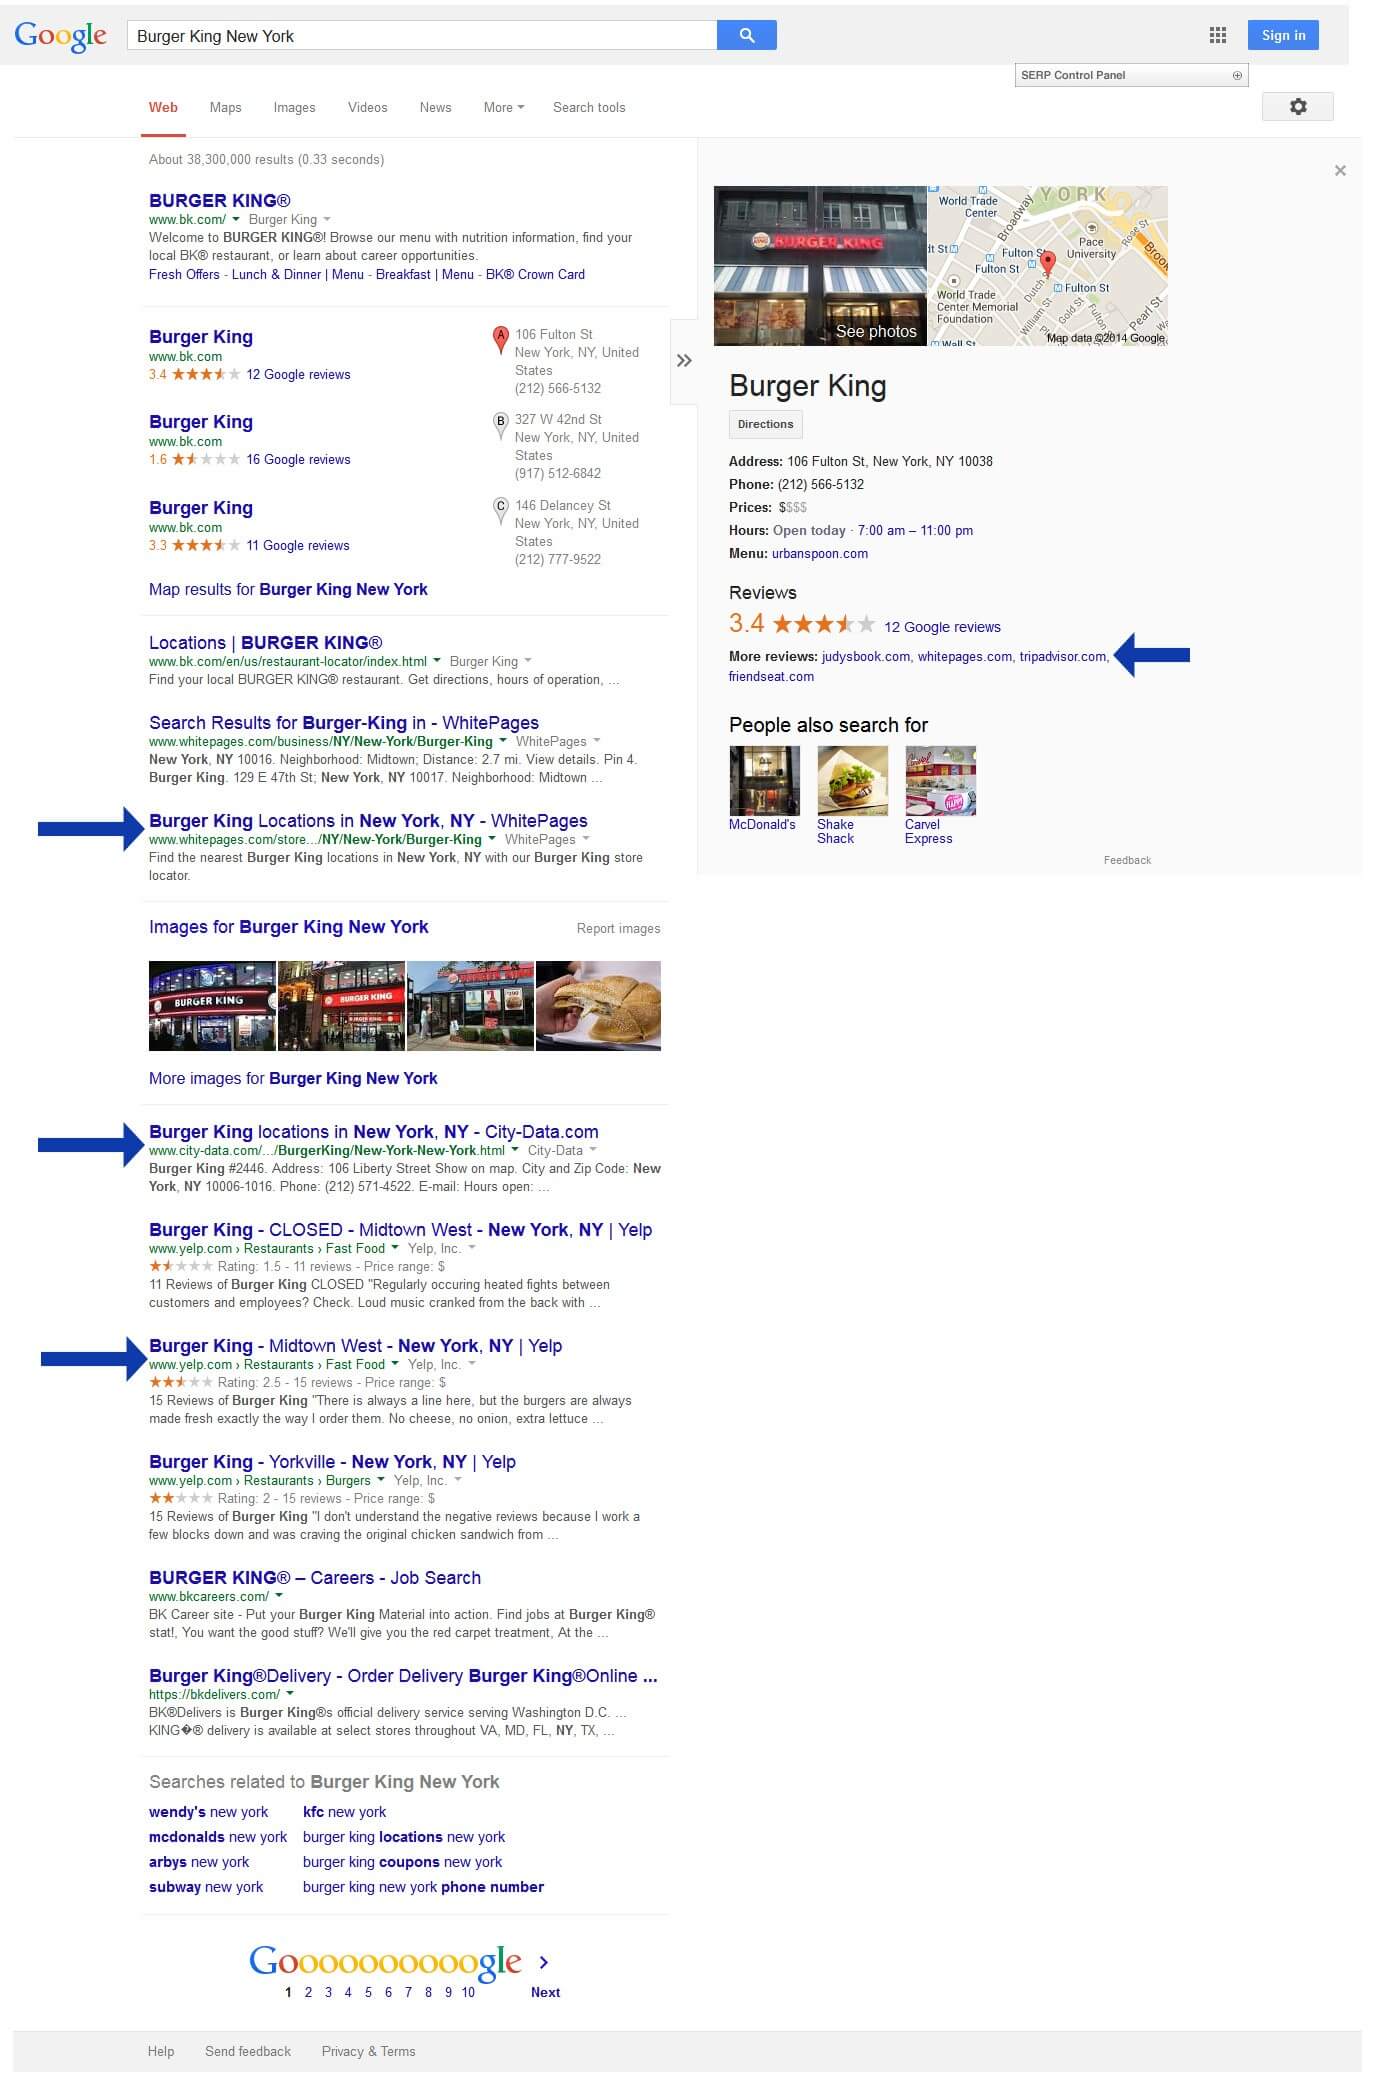 Burger King, New York in Google to find the right listings